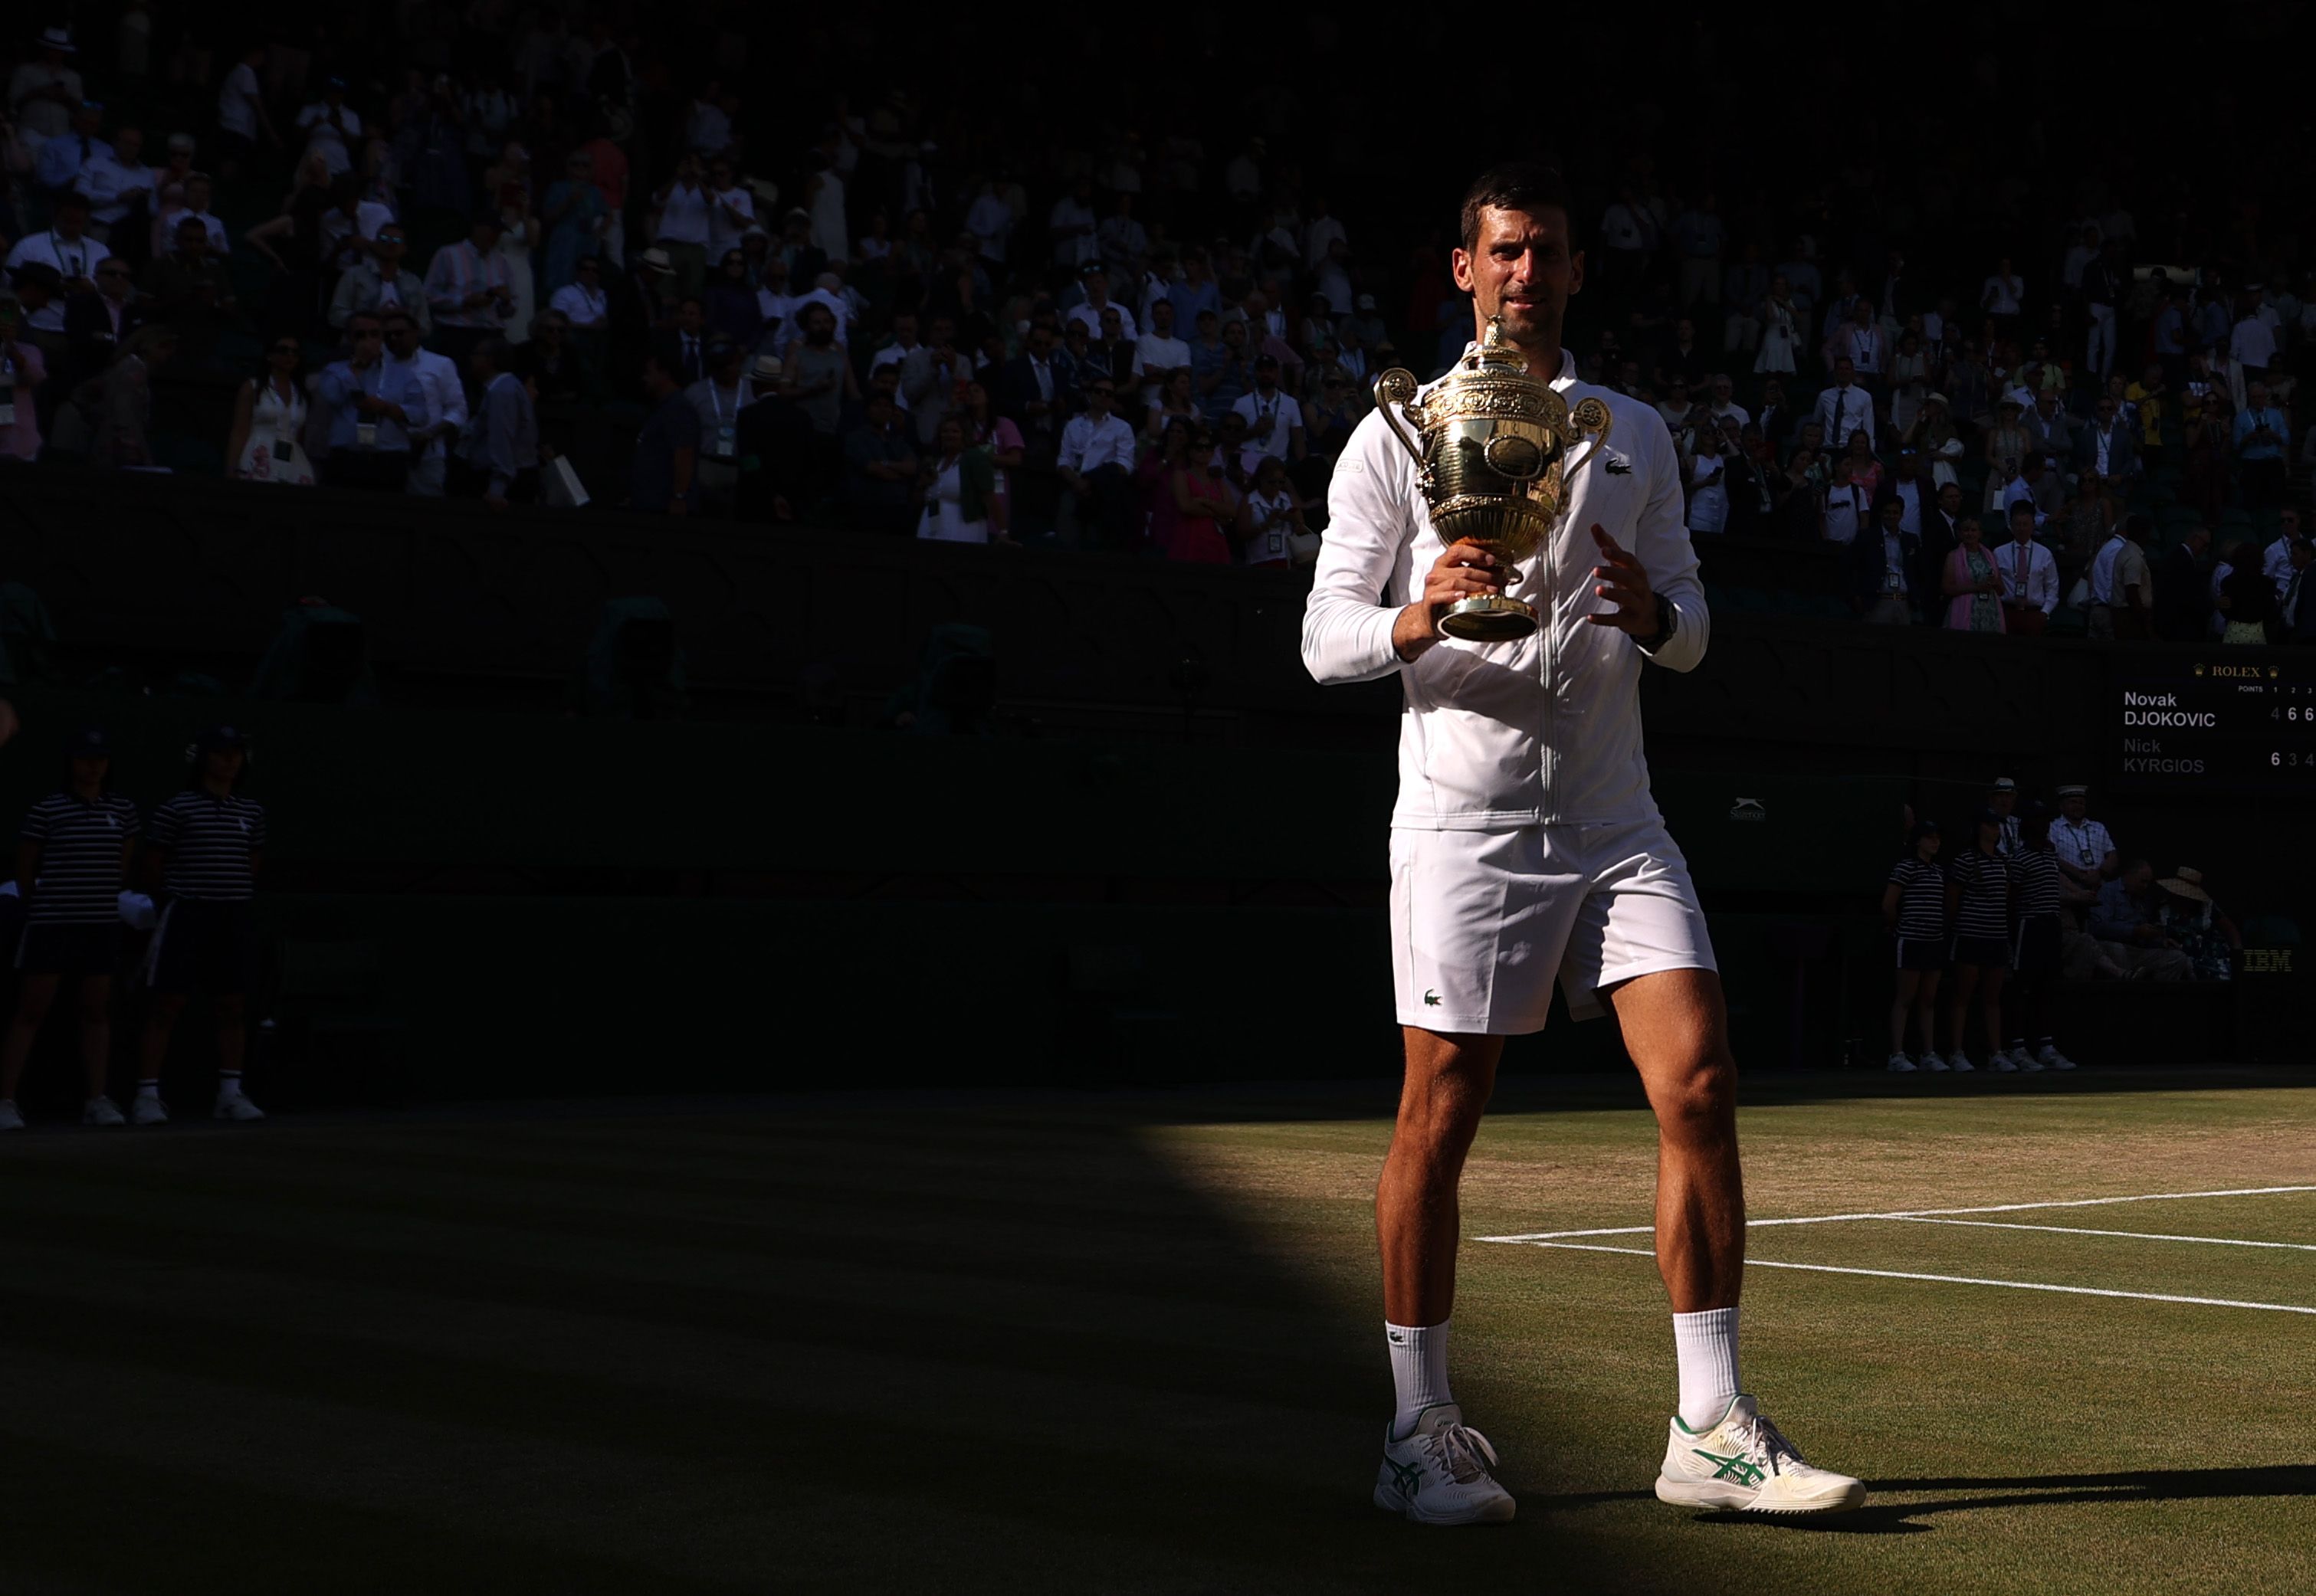 Novak Djokovic of Serbia celebrates with the trophy following his victory against Nick Kyrgios of Australia during their Men's Singles Final match on day fourteen of The Championships Wimbledon 2022 at All England Lawn Tennis and Croquet Club on July 10, 2022 in London, England.